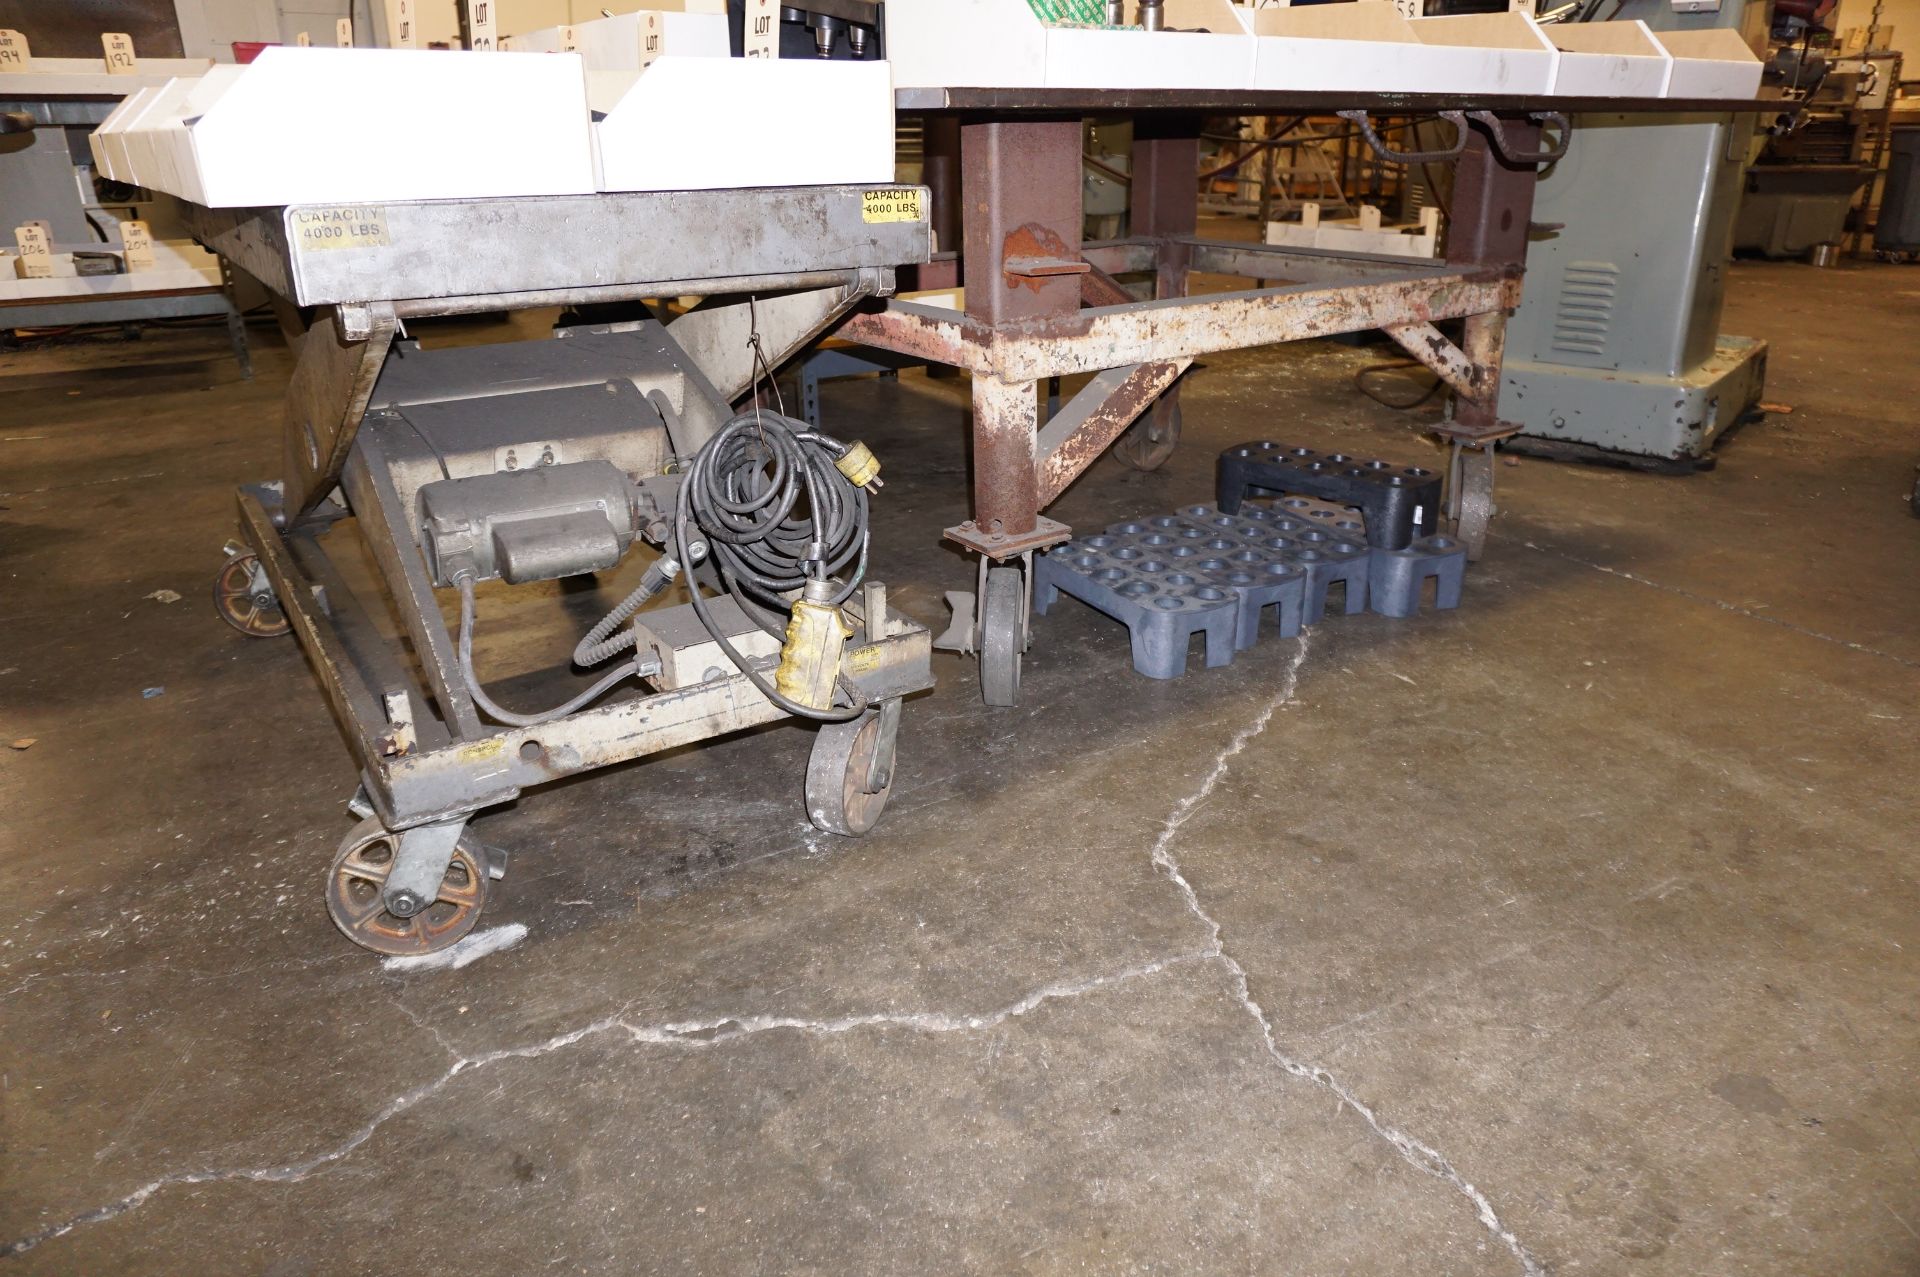 LOT TO INCLUDE: (1) 4000 LB CAP HYDRAULIC LIFT MODEL L9436, S/N 50250A, (1) STEEL WORK TABLE,